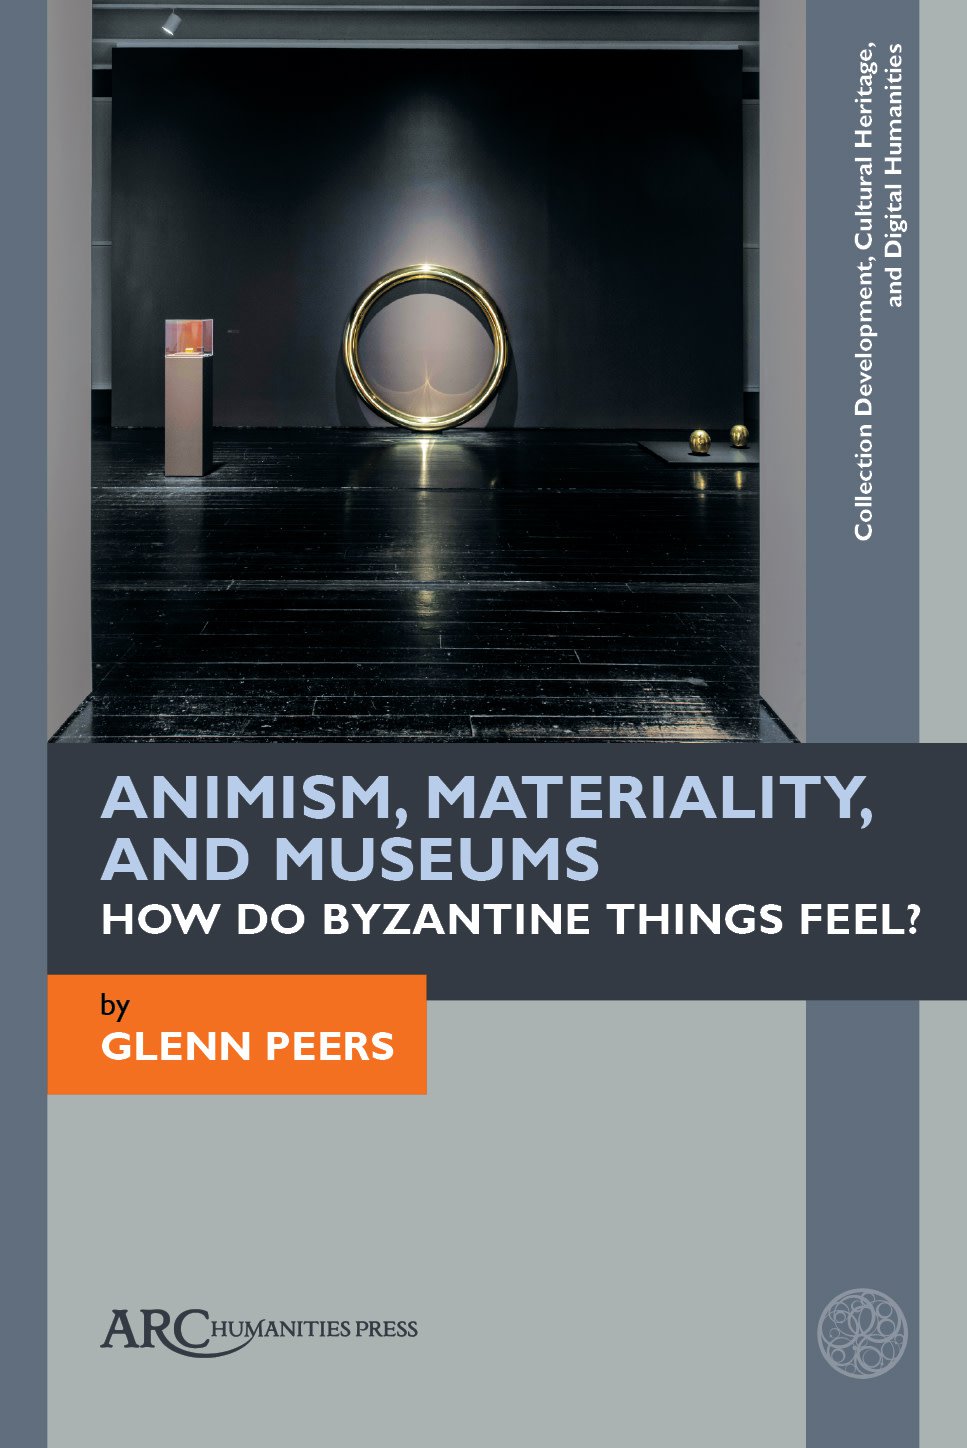 Animism, Materiality, and Museums: How Do Byzantine Things Feel?